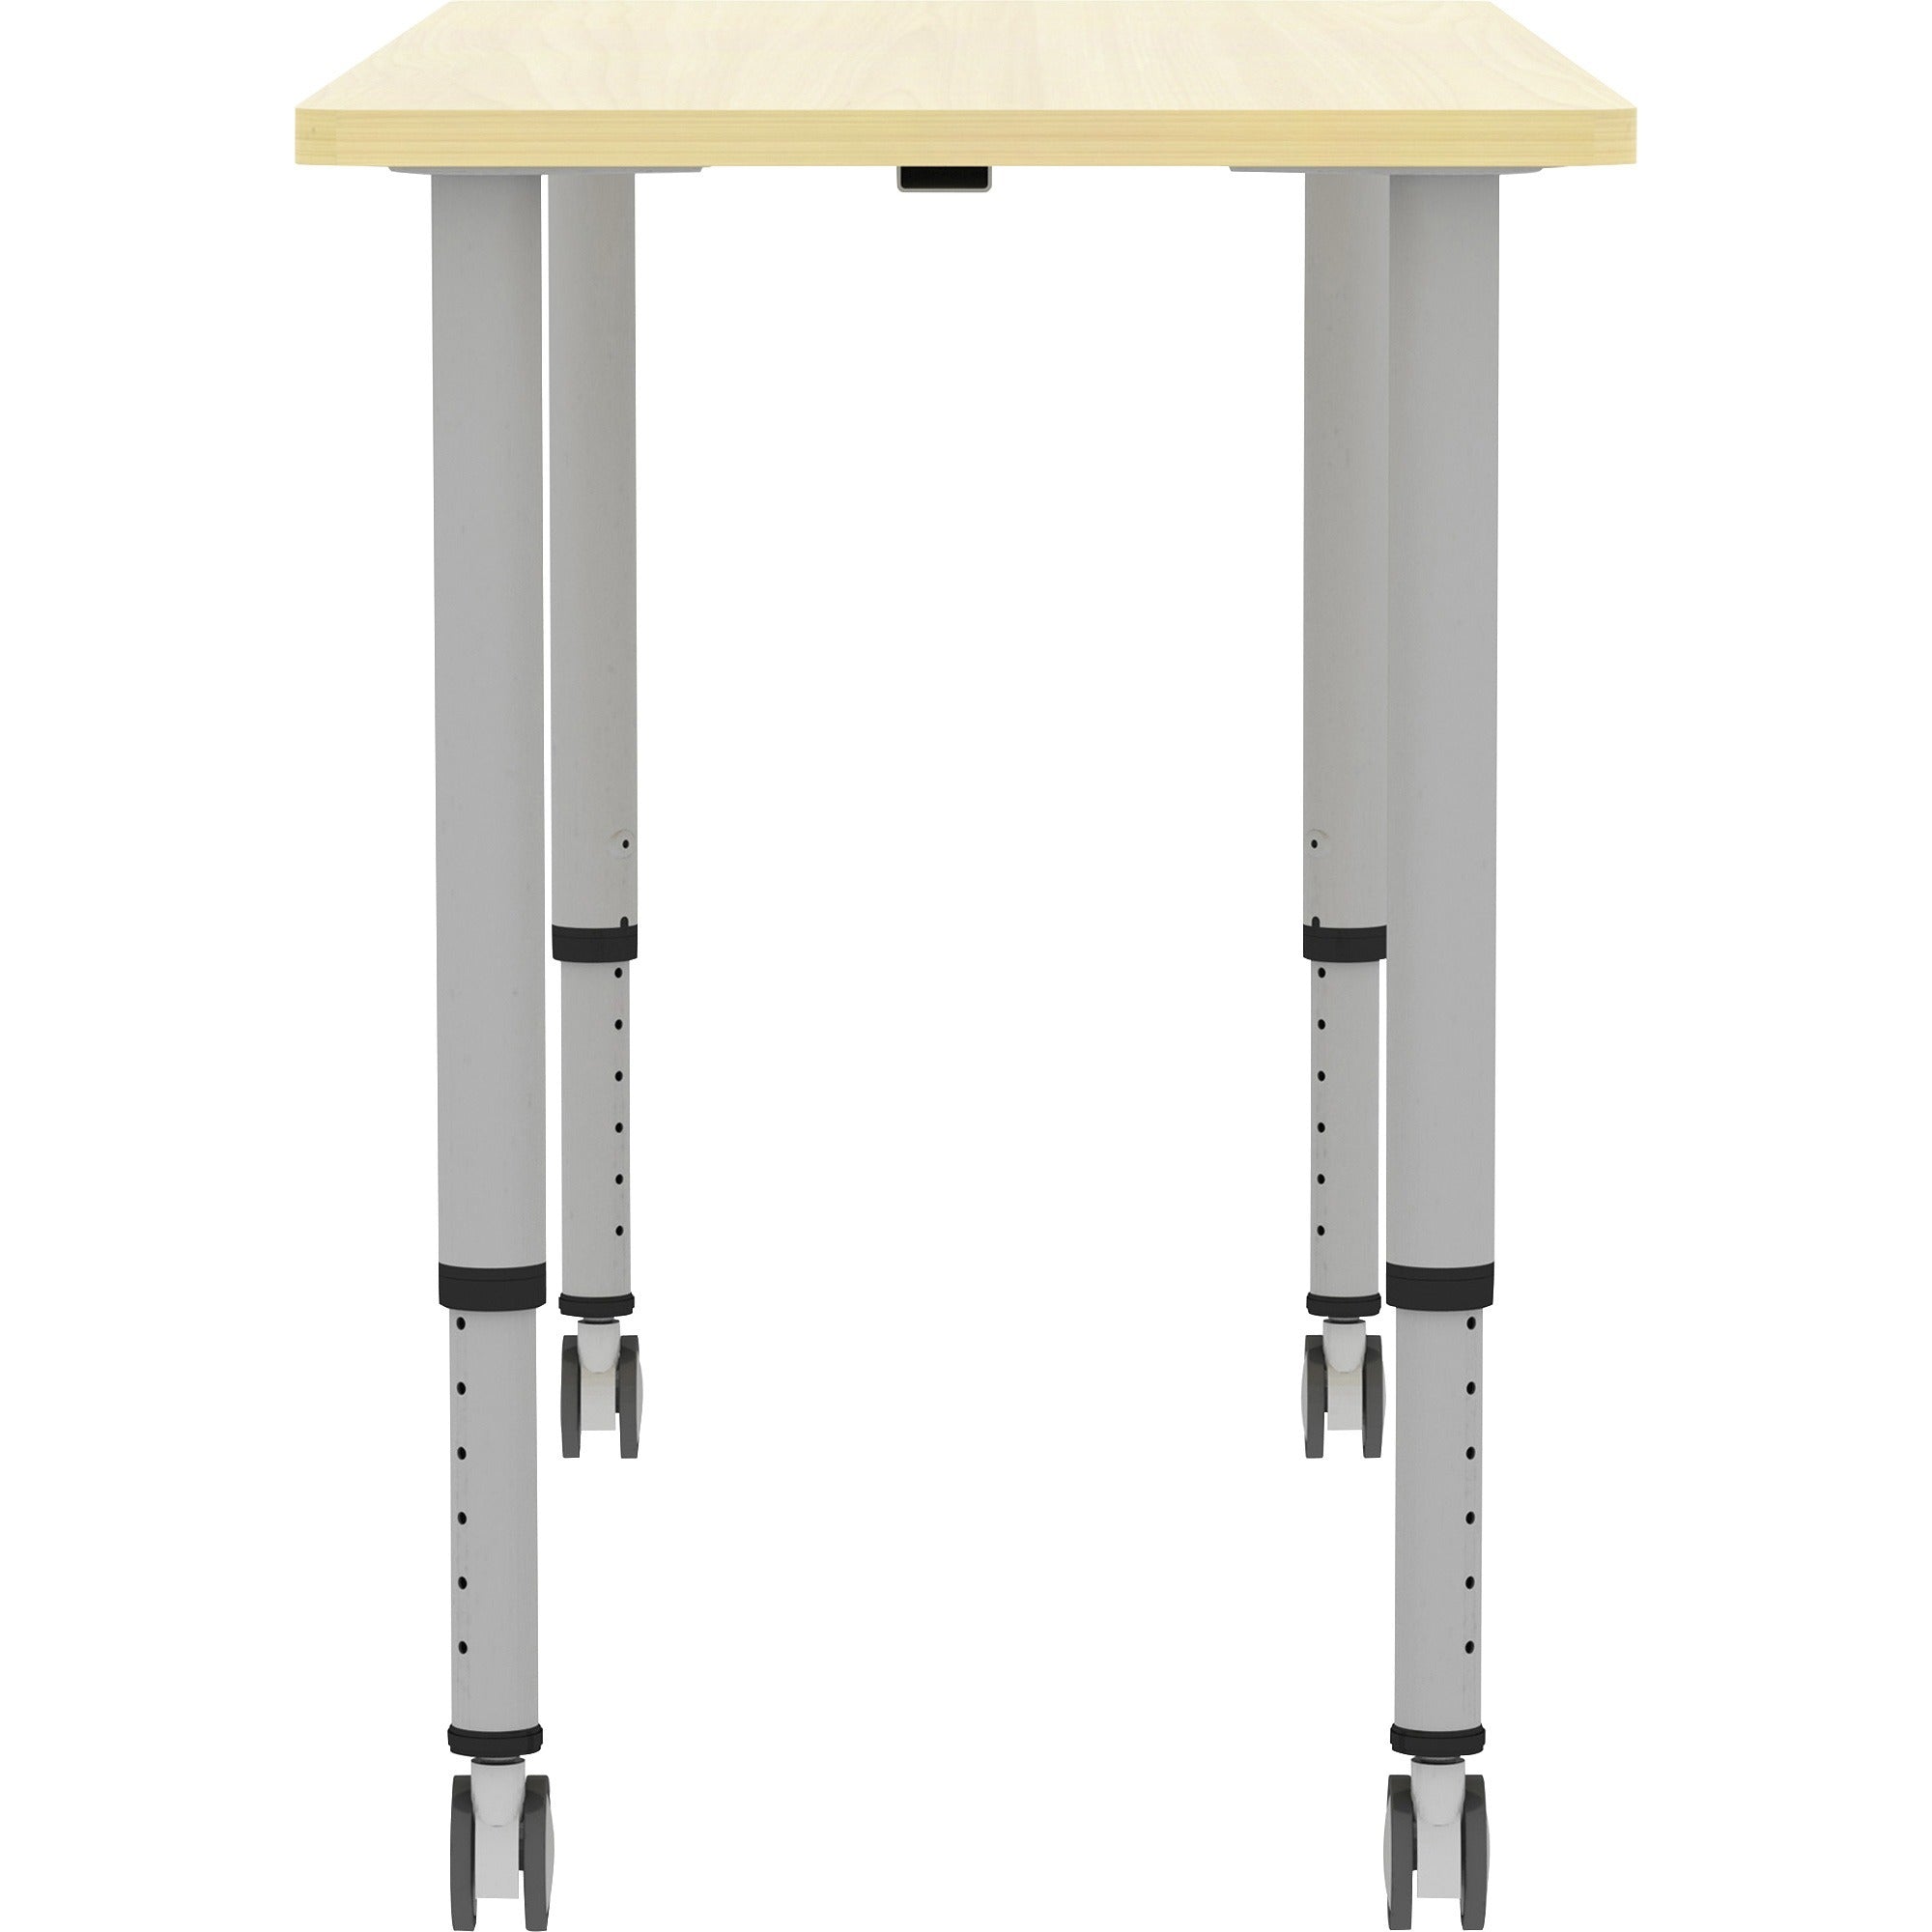 lorell-attune-height-adjustable-multipurpose-rectangular-table-for-table-toprectangle-top-adjustable-height-2662-to-3362-adjustment-x-60-table-top-width-x-2362-table-top-depth-3362-height-assembly-required-laminated-maple-la_llr69580 - 4